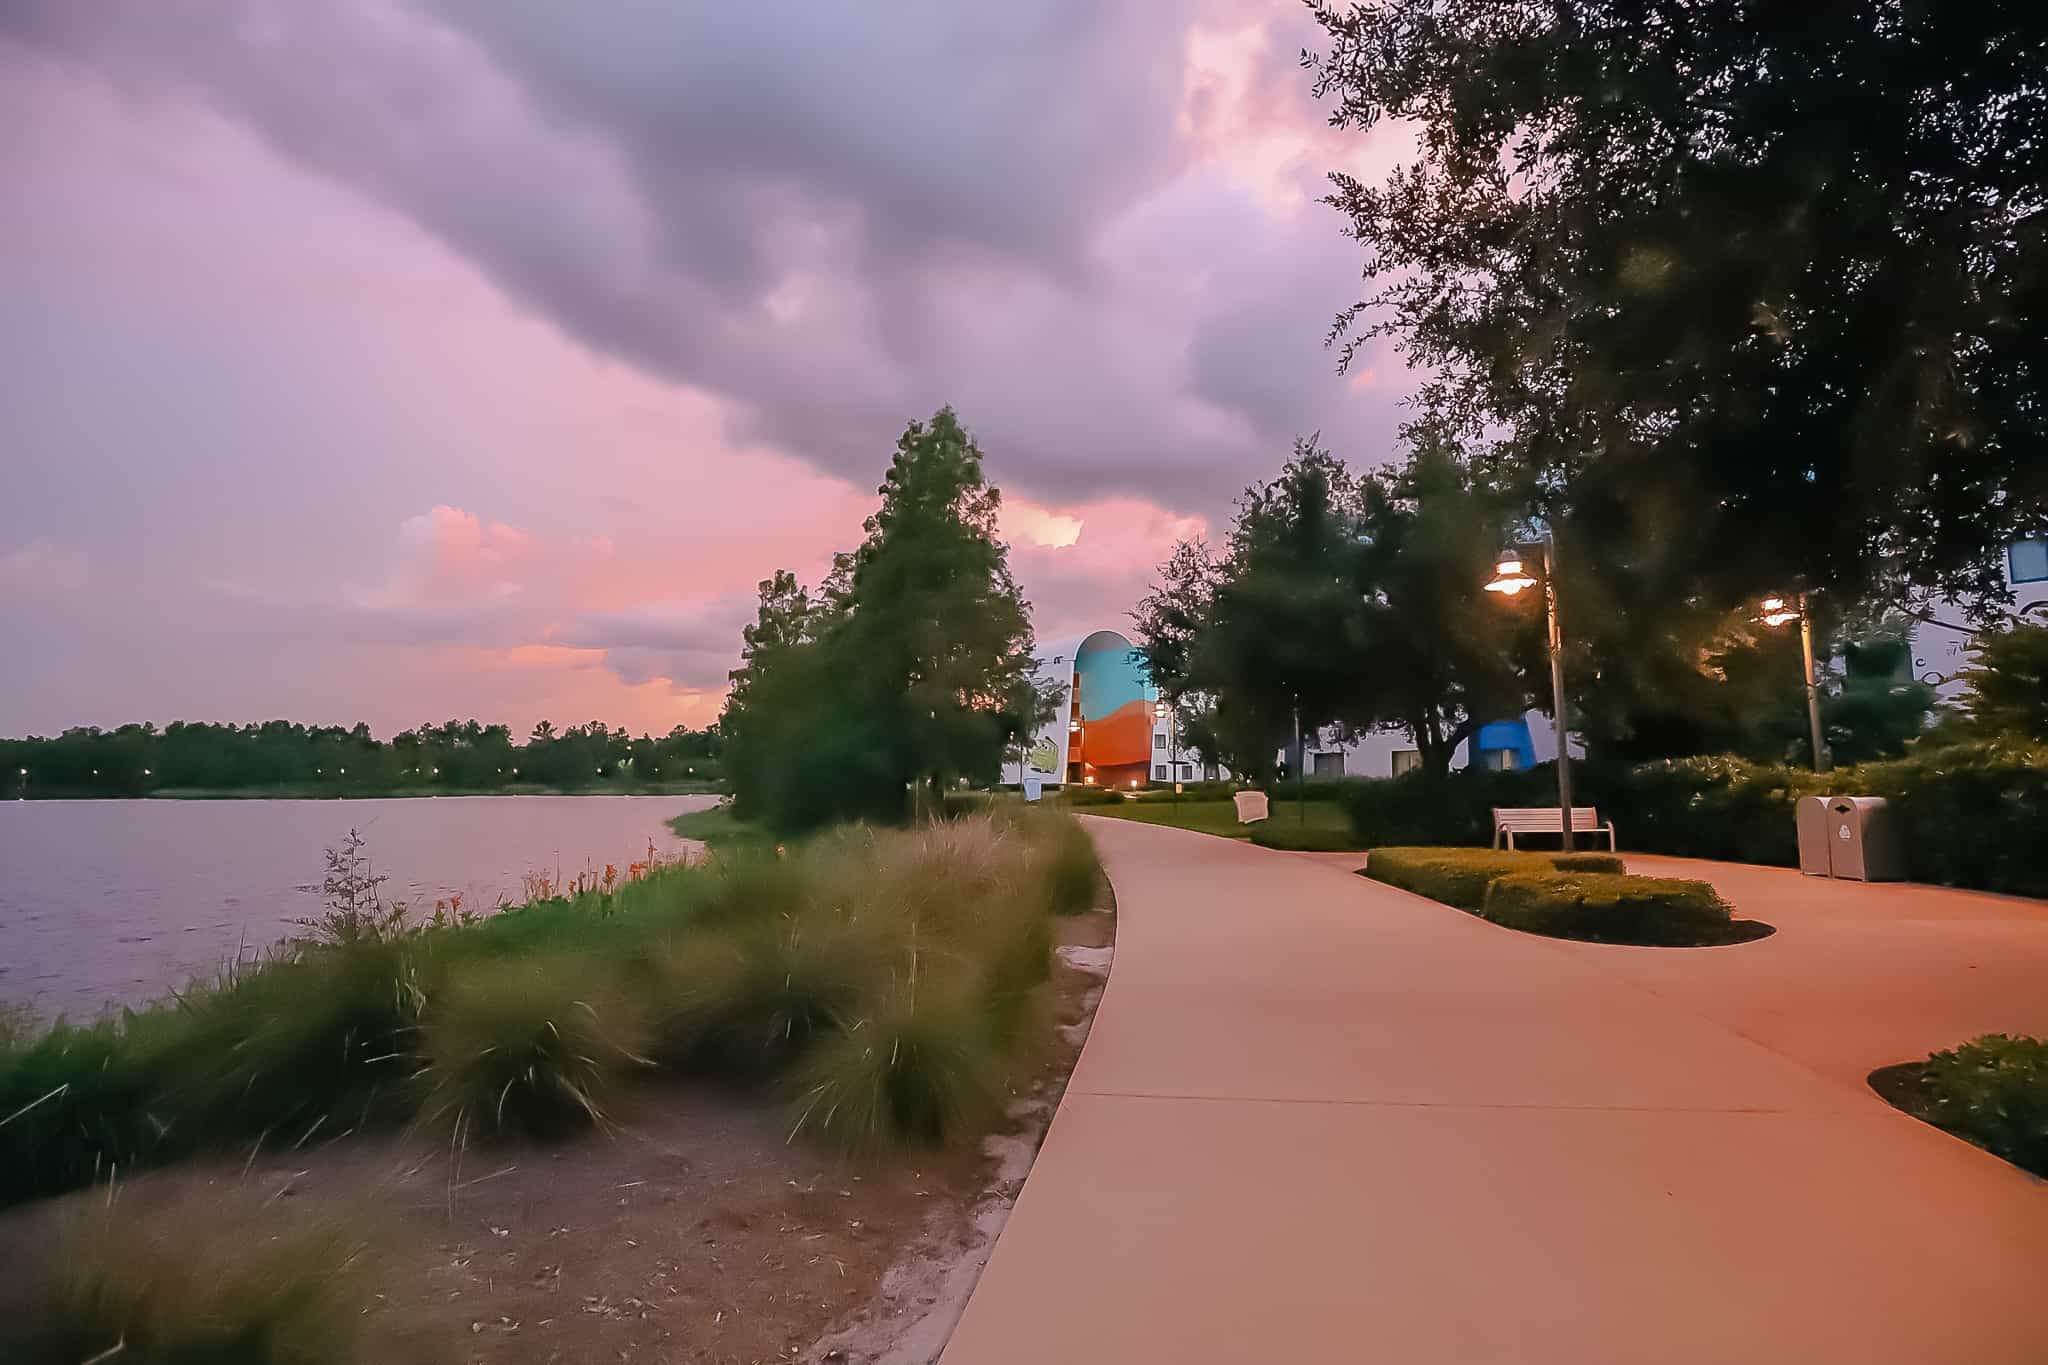 walkway at Art of Animation during sunset